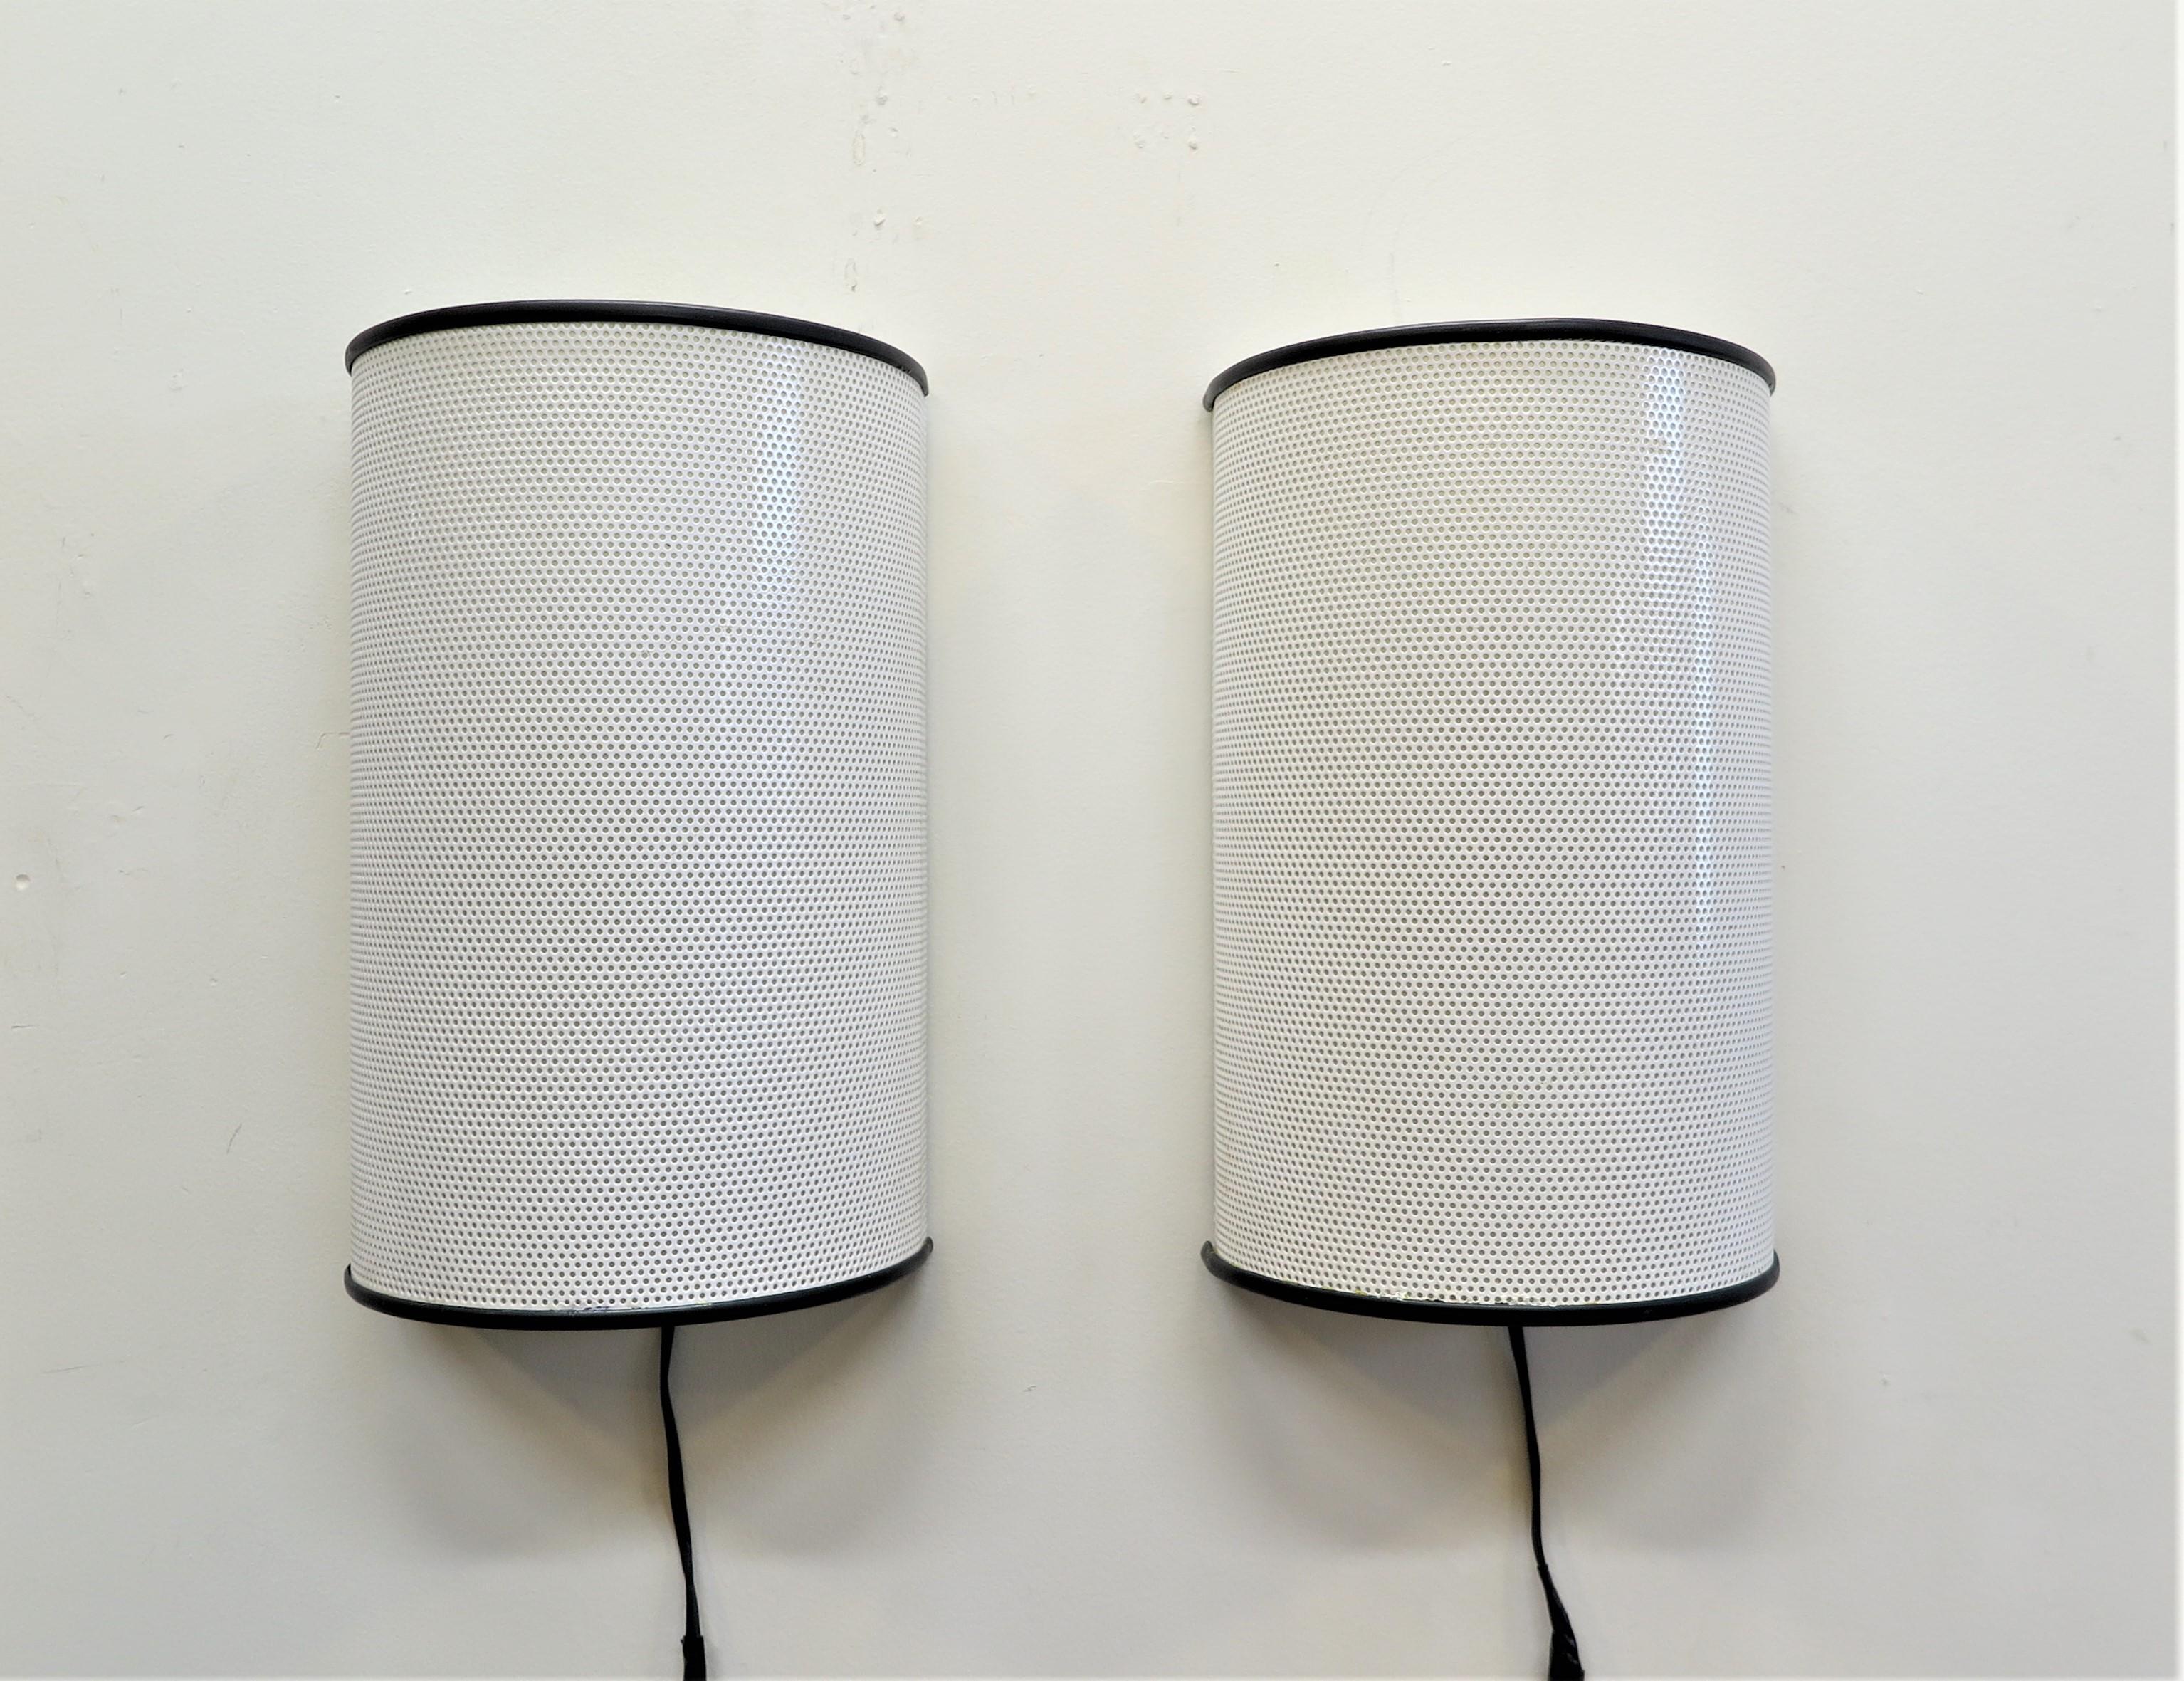 Ron Rezek for Artemide sconces. Shades are perforated white powder coated steel with black rubber trim on the rims. A plastic coating inside the shade covers the perforations and help soften the diffusion. Manufactured in 1978 one his early designs